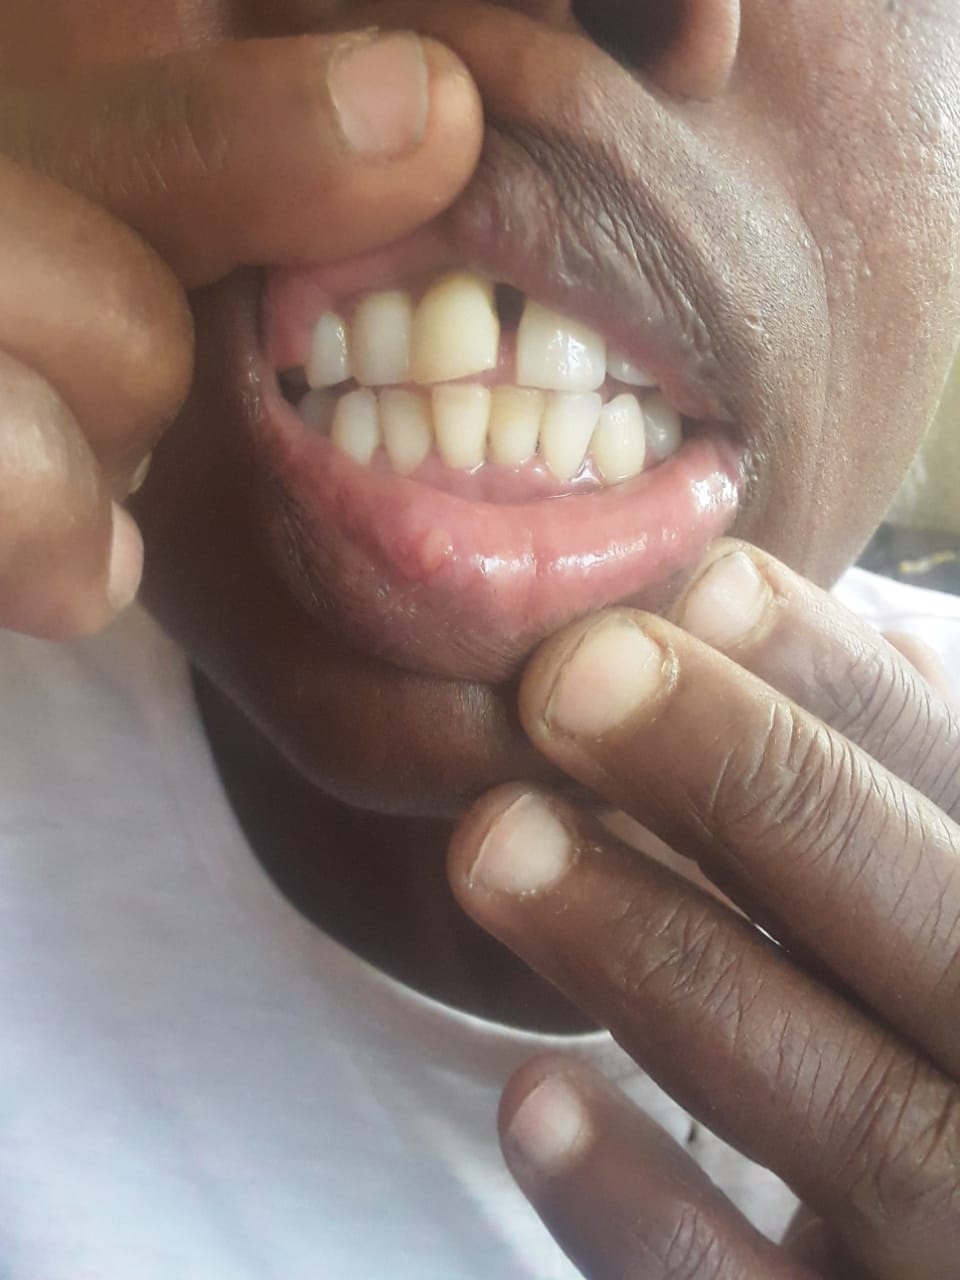 The woman claims she was klapped and her teeth are loose as a result. Photo by Ntebatse Masipa